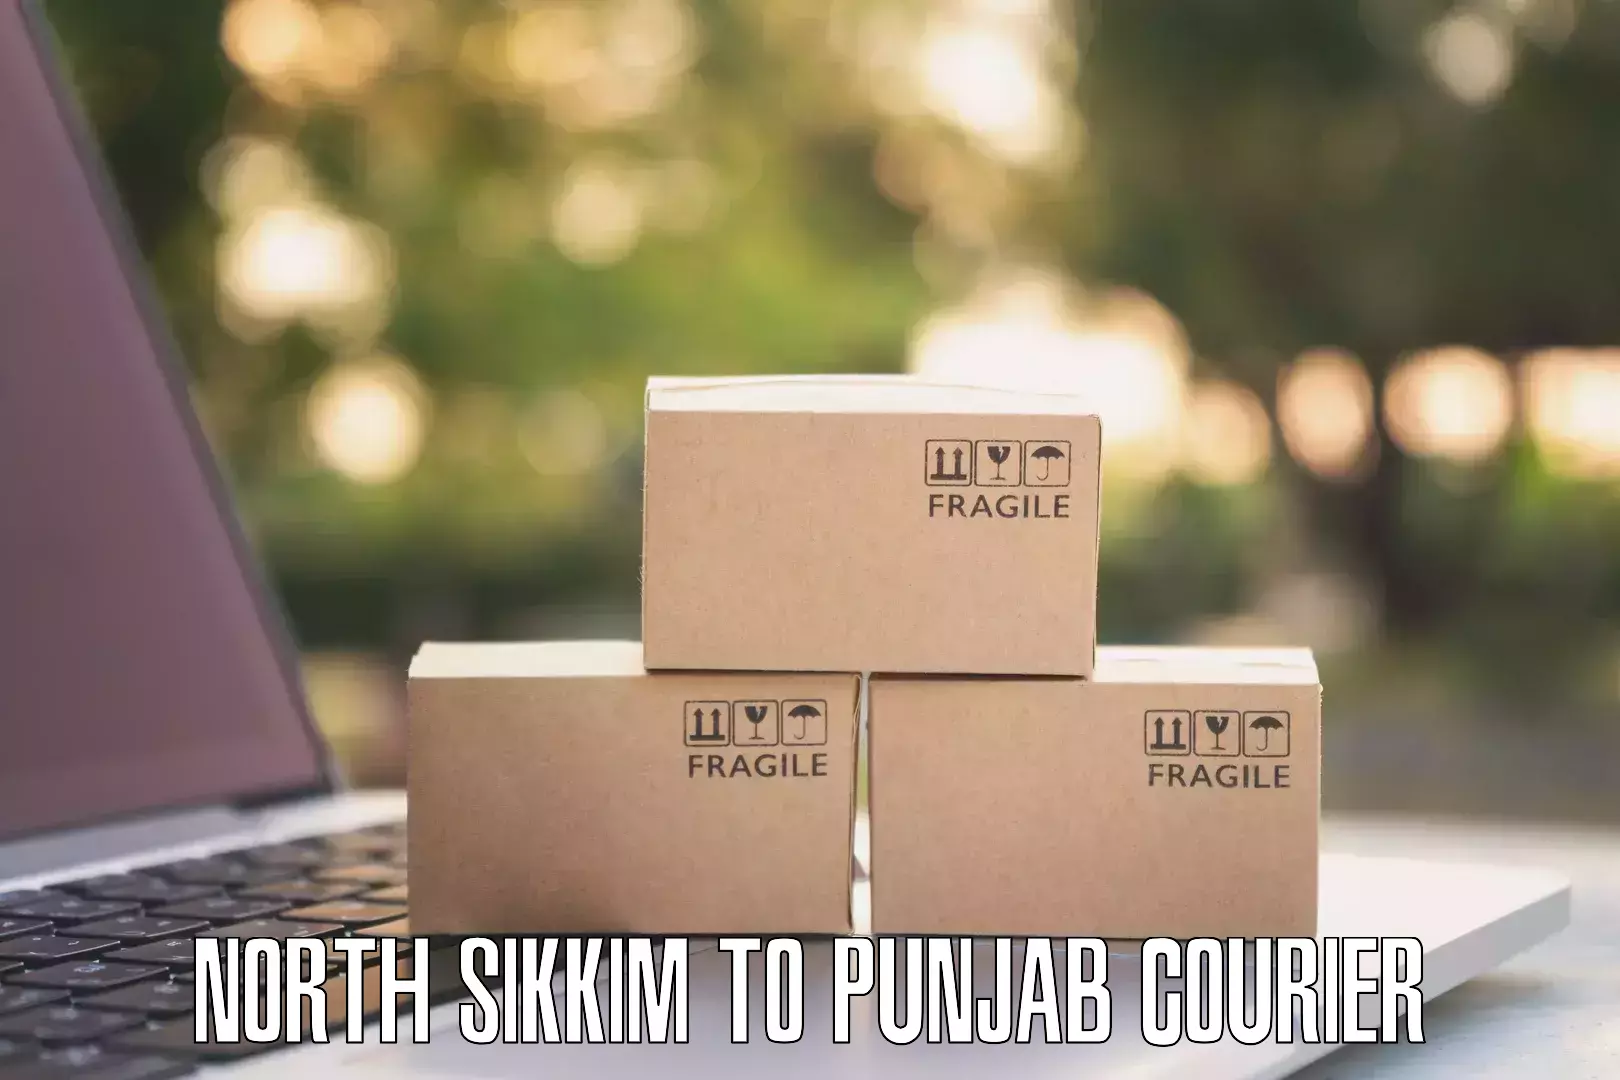 Next-generation courier services North Sikkim to Dhilwan